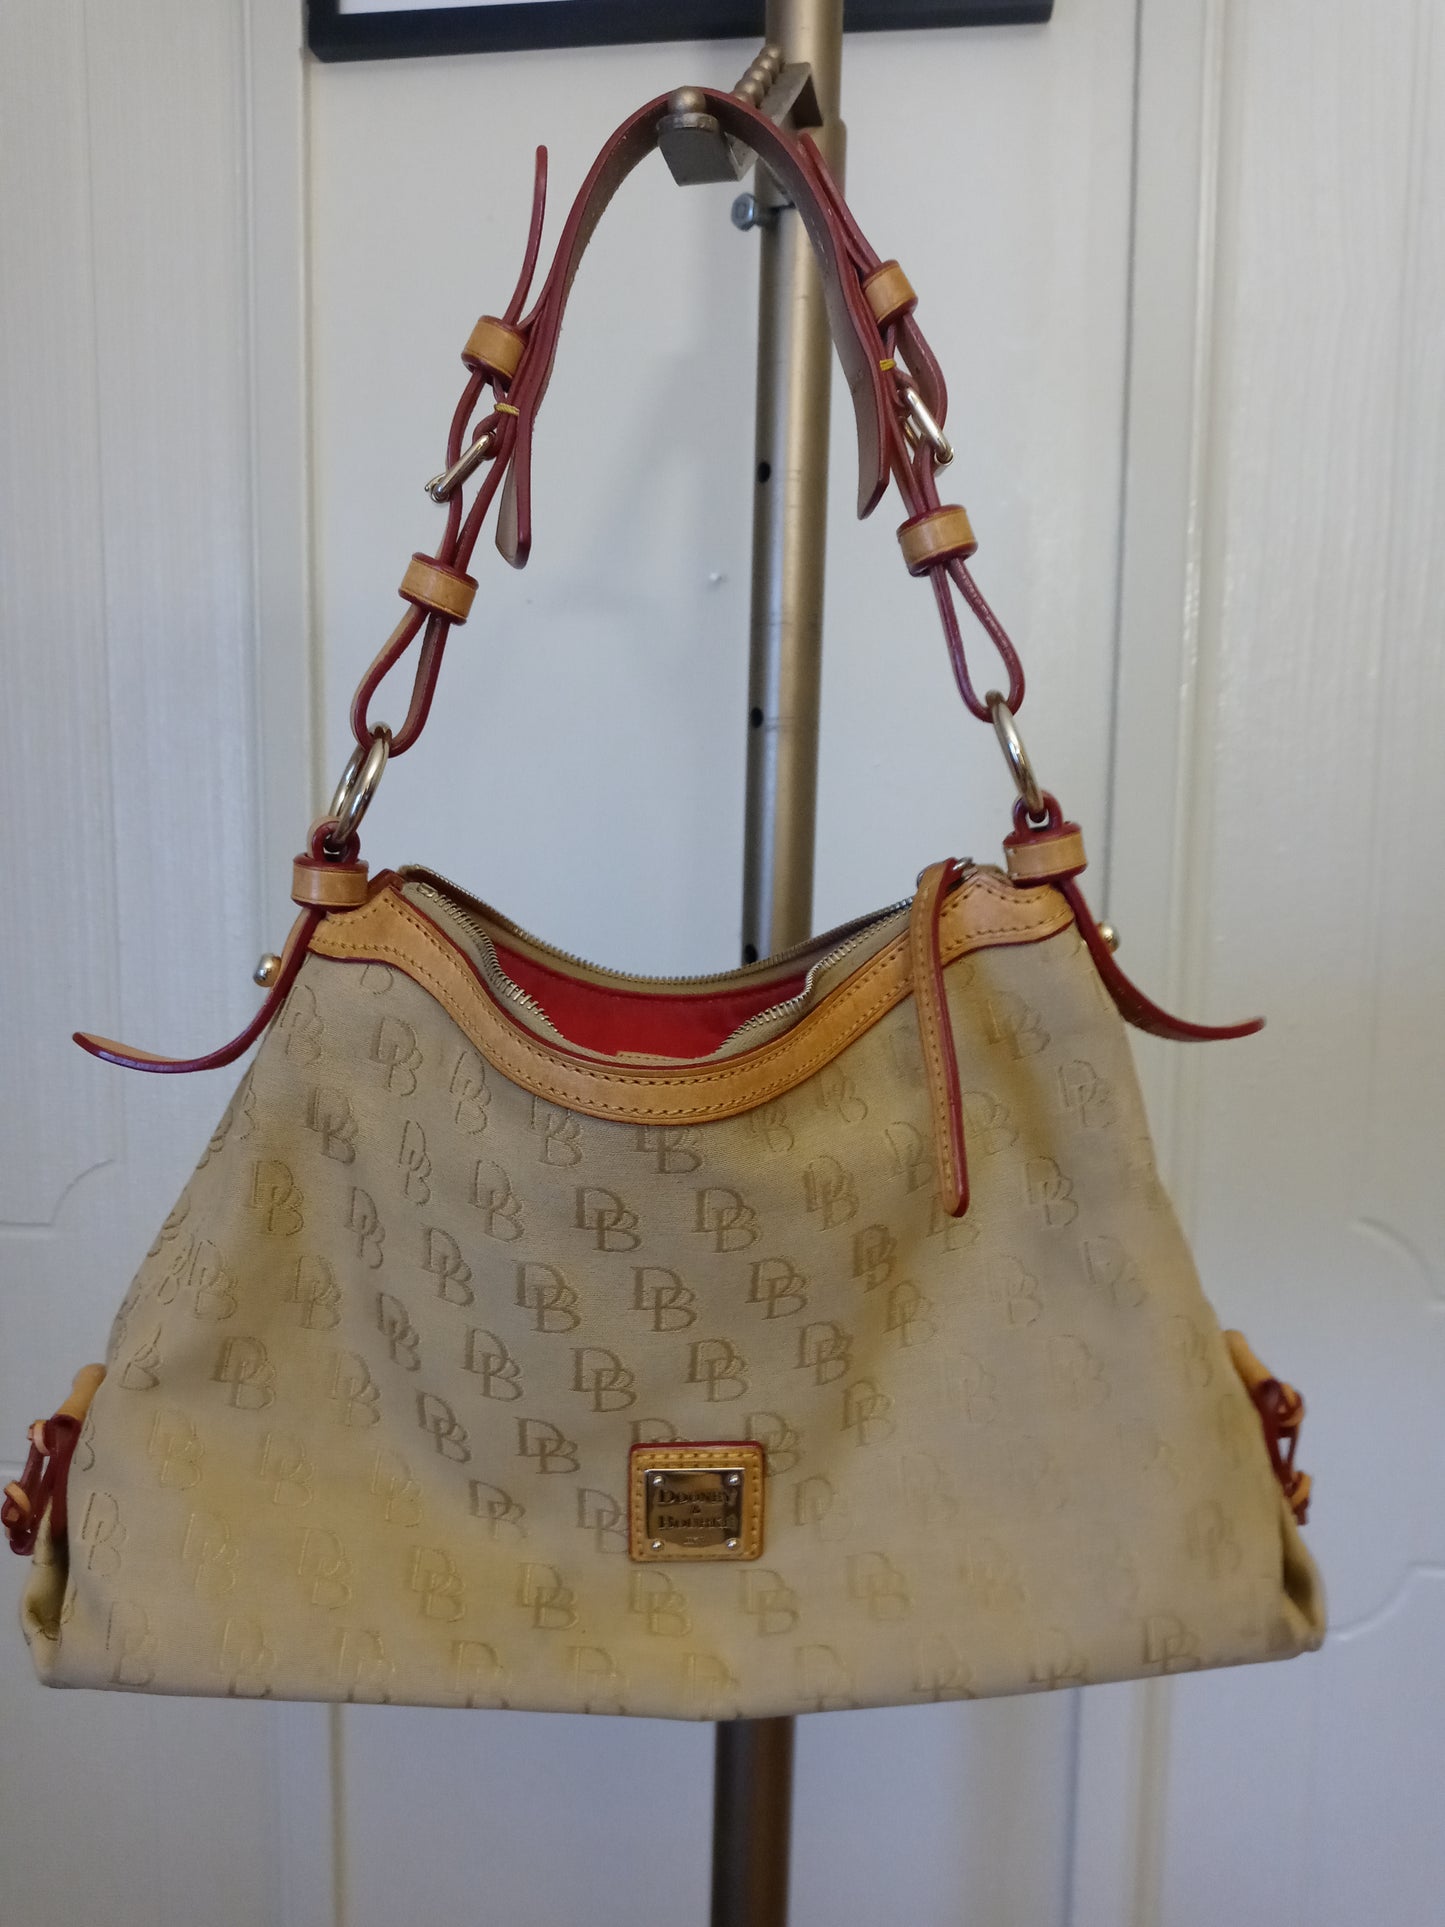 Fabric Dooney & Bourke purse with leather accents